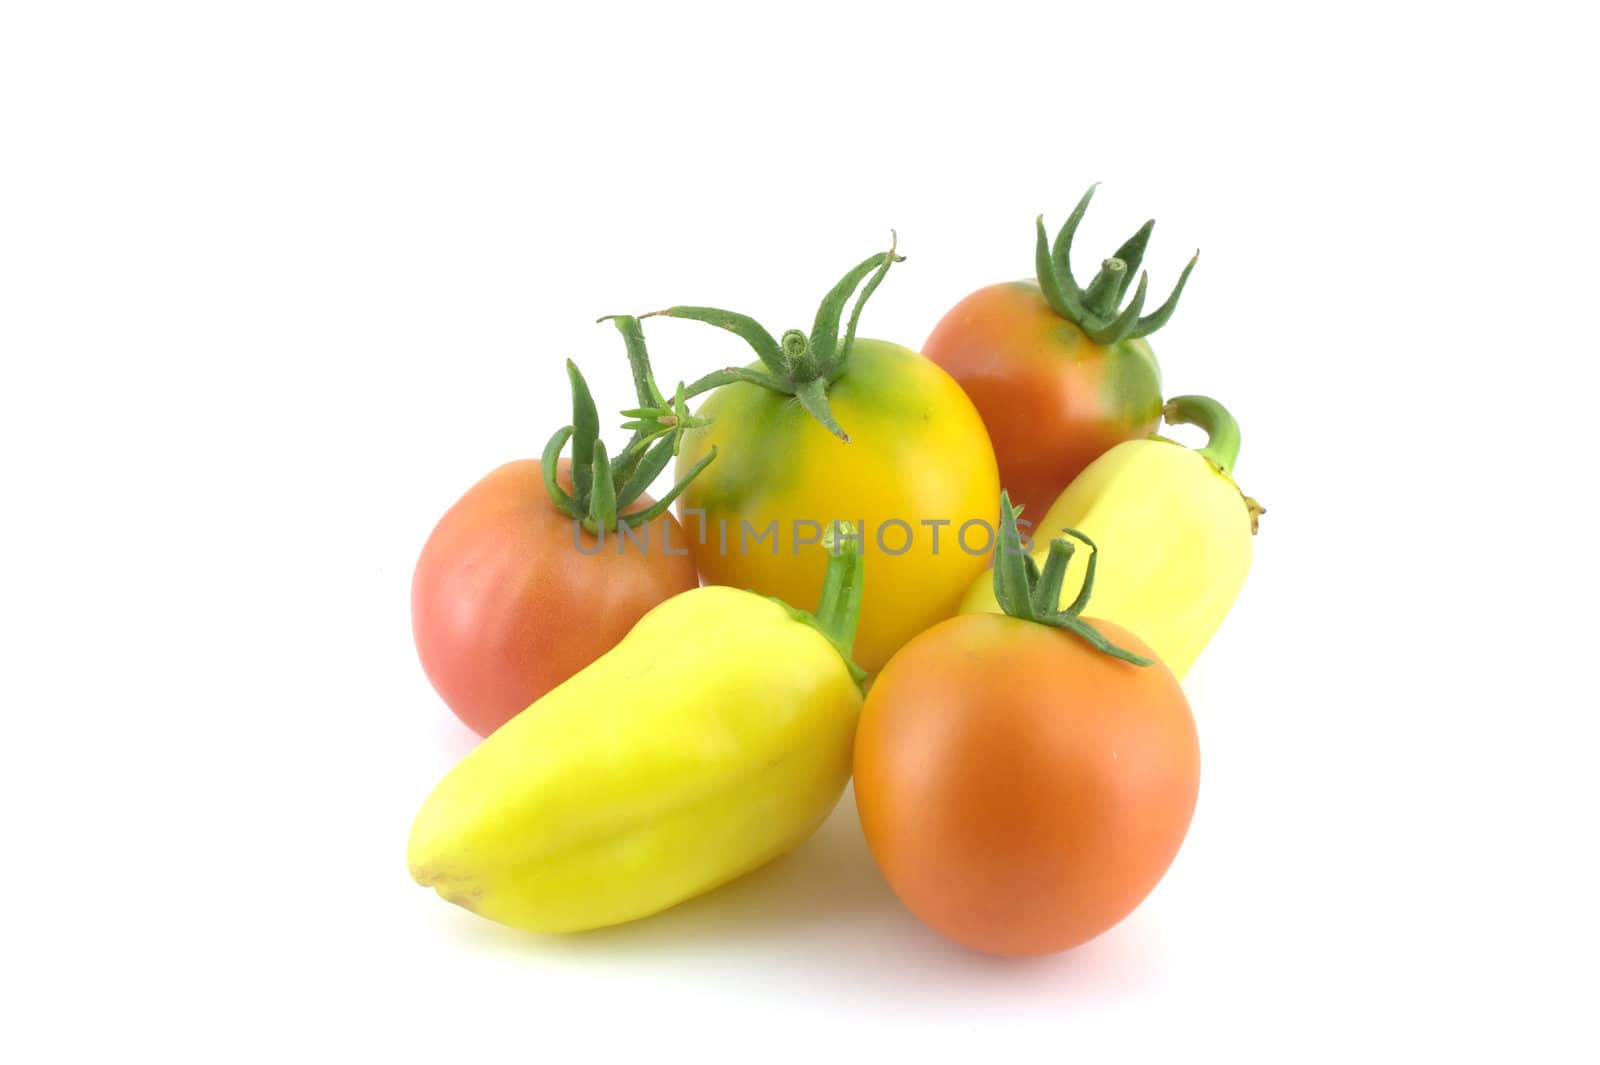 Tomatoes and peppers on white background by sergpet